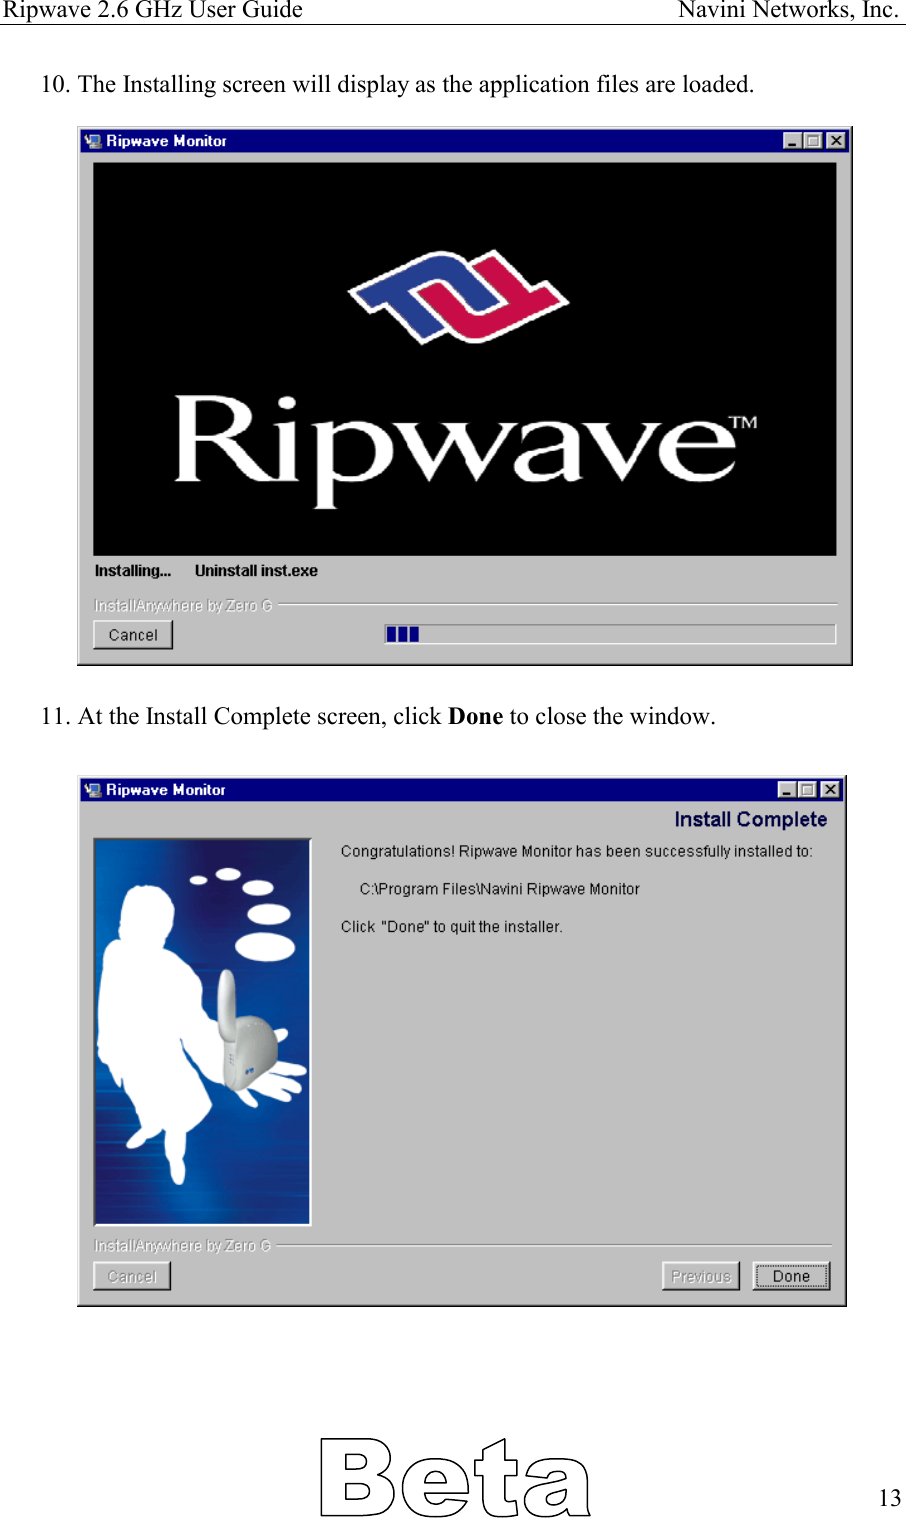 Ripwave 2.6 GHz User Guide                                                            Navini Networks, Inc. 10. The Installing screen will display as the application files are loaded.                       11. At the Install Complete screen, click Done to close the window.                            13